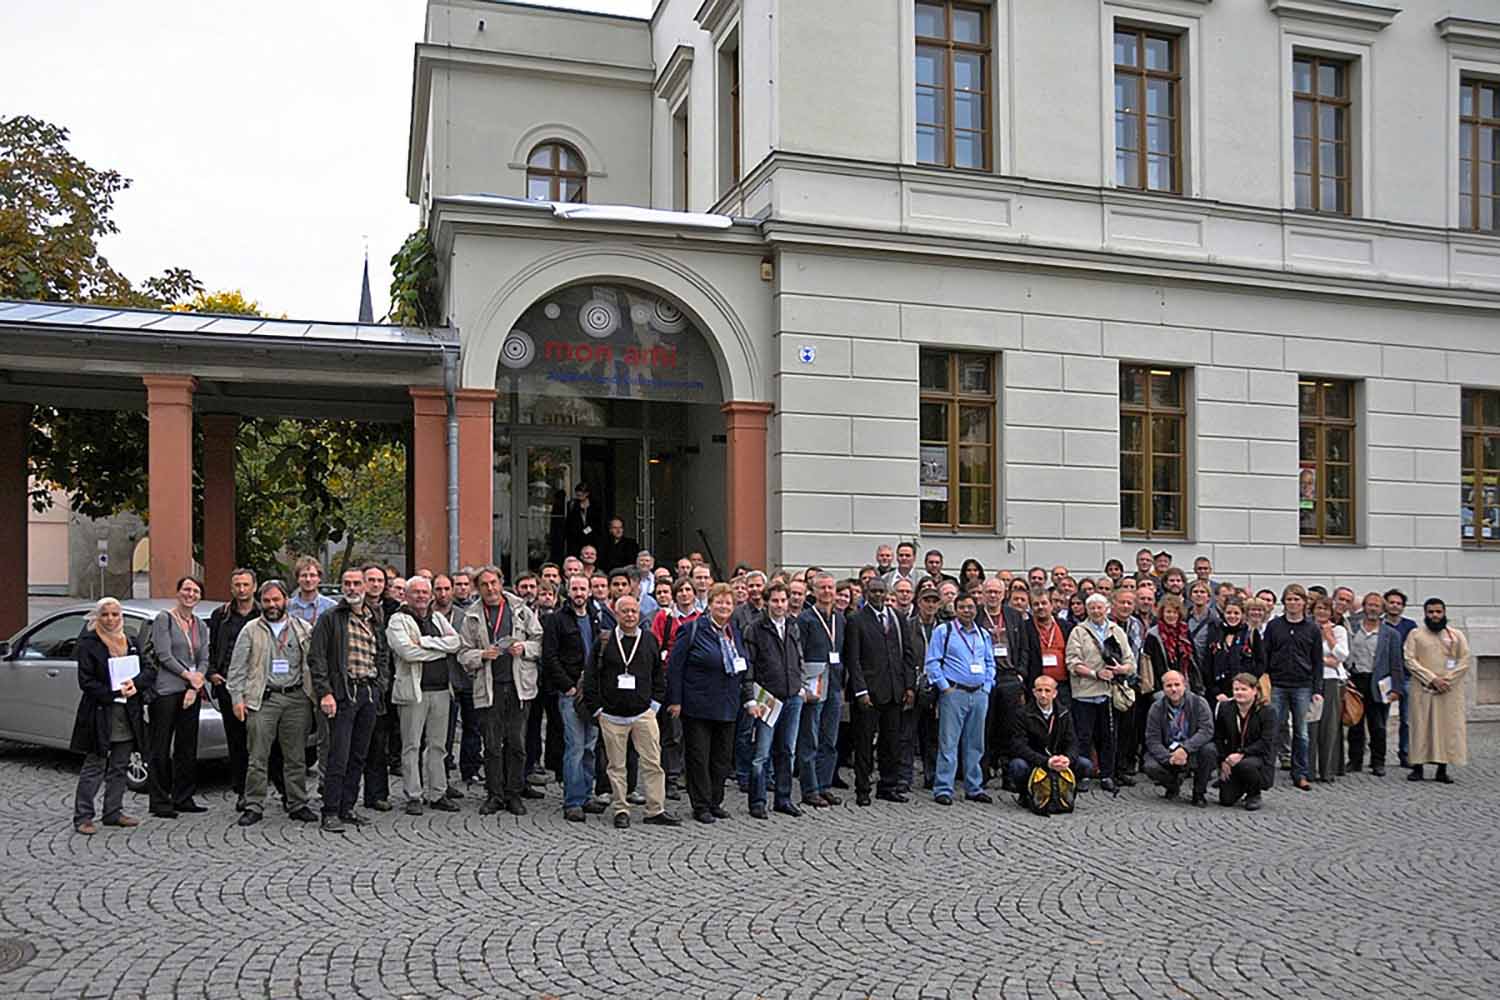 Group photo of conference delegates